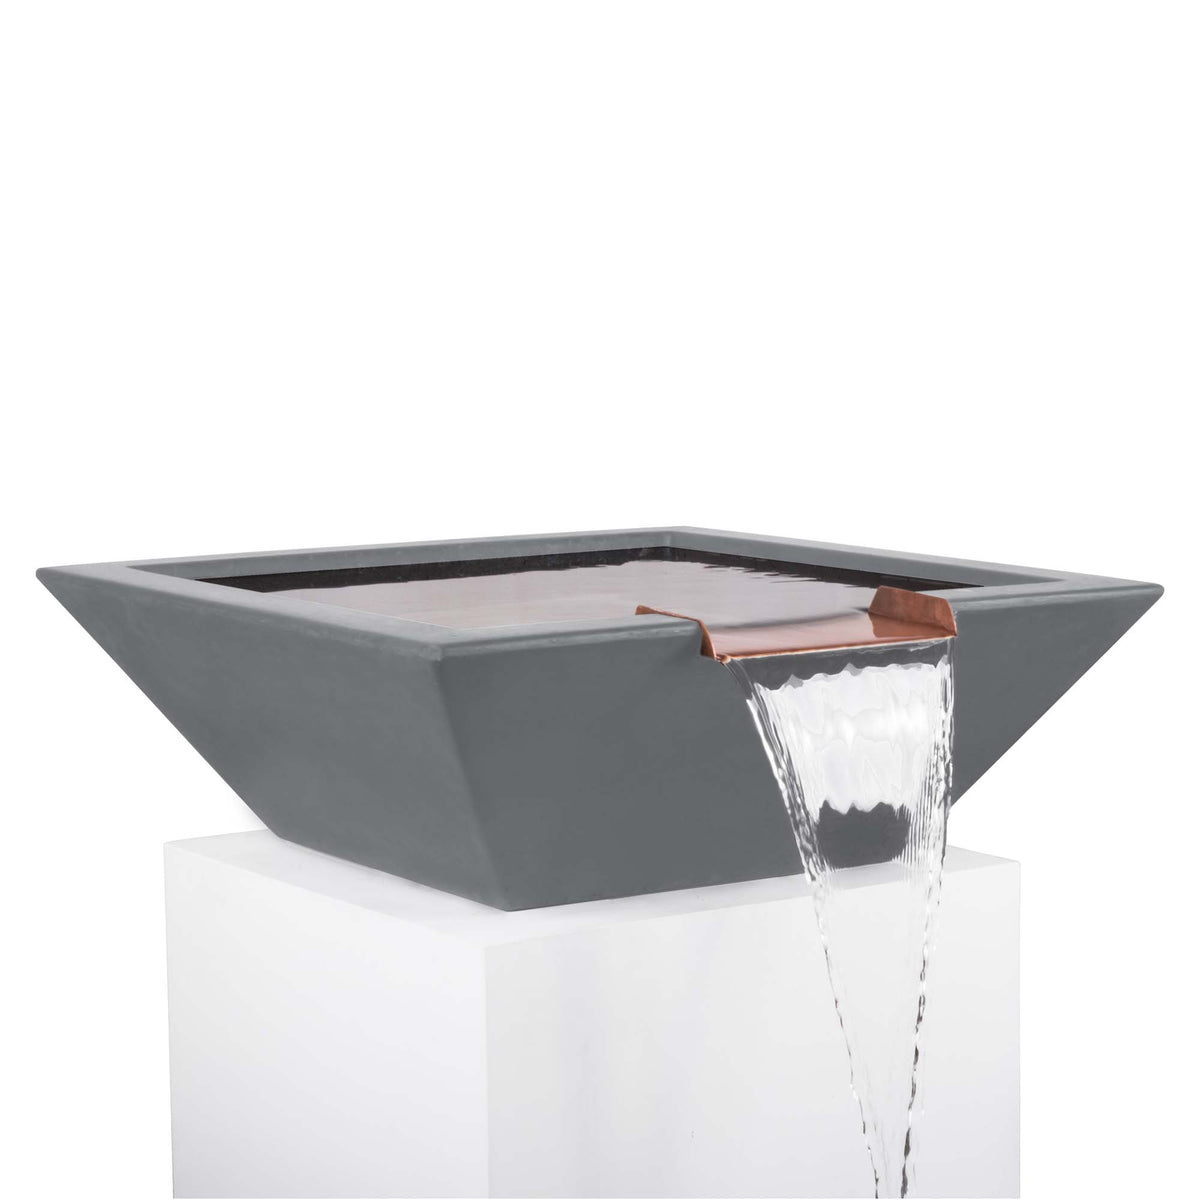 The Outdoor Plus Maya GFRC Concrete Square Water Bowl in Natural Gray